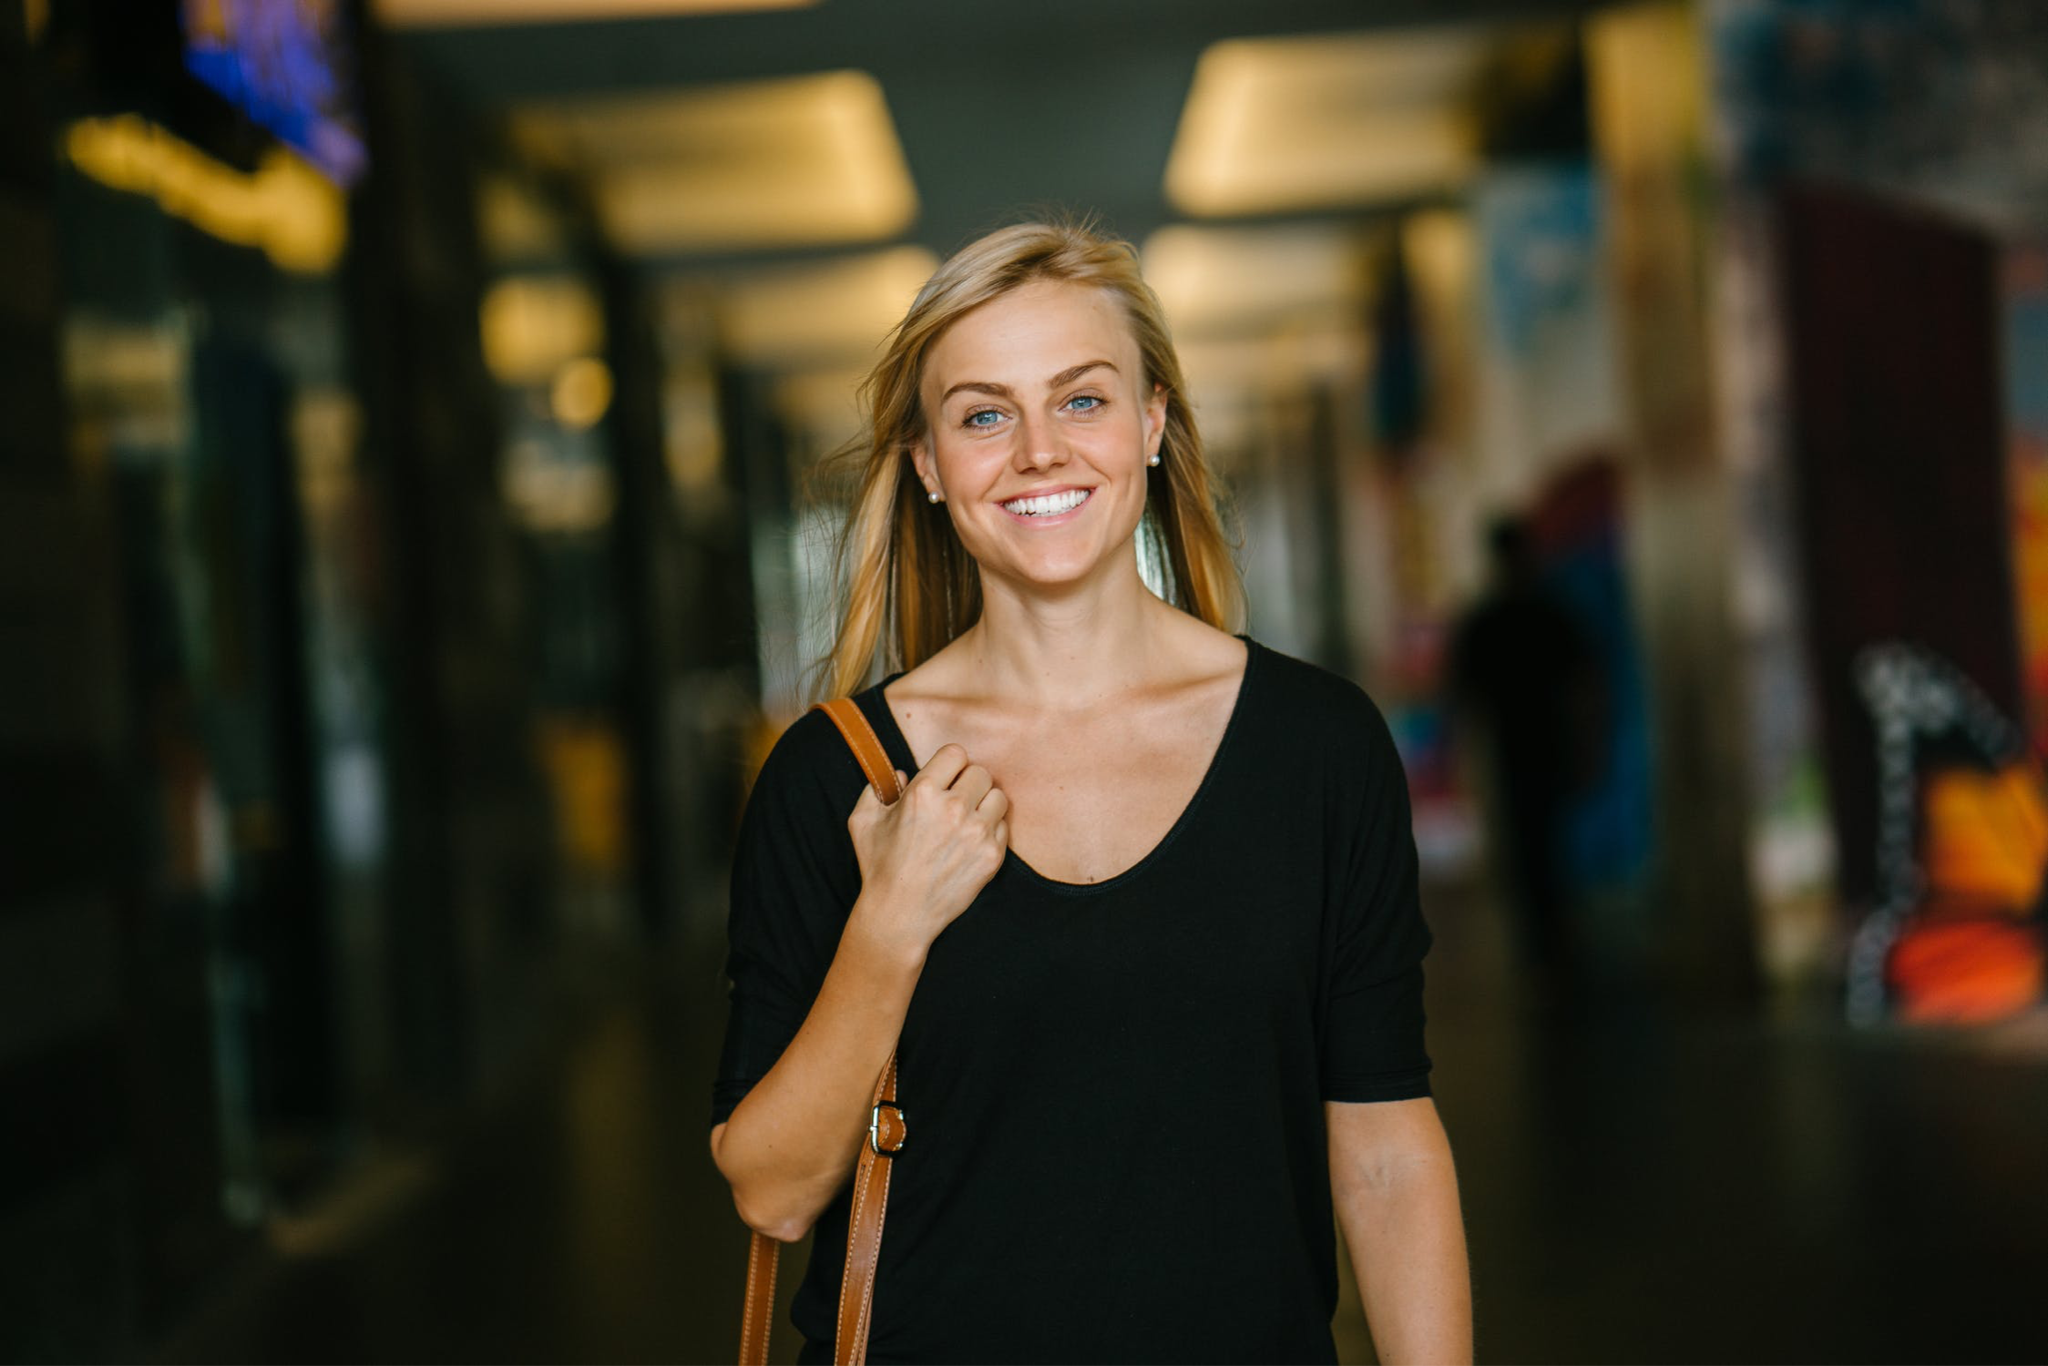 Smiling woman in a shopping mall